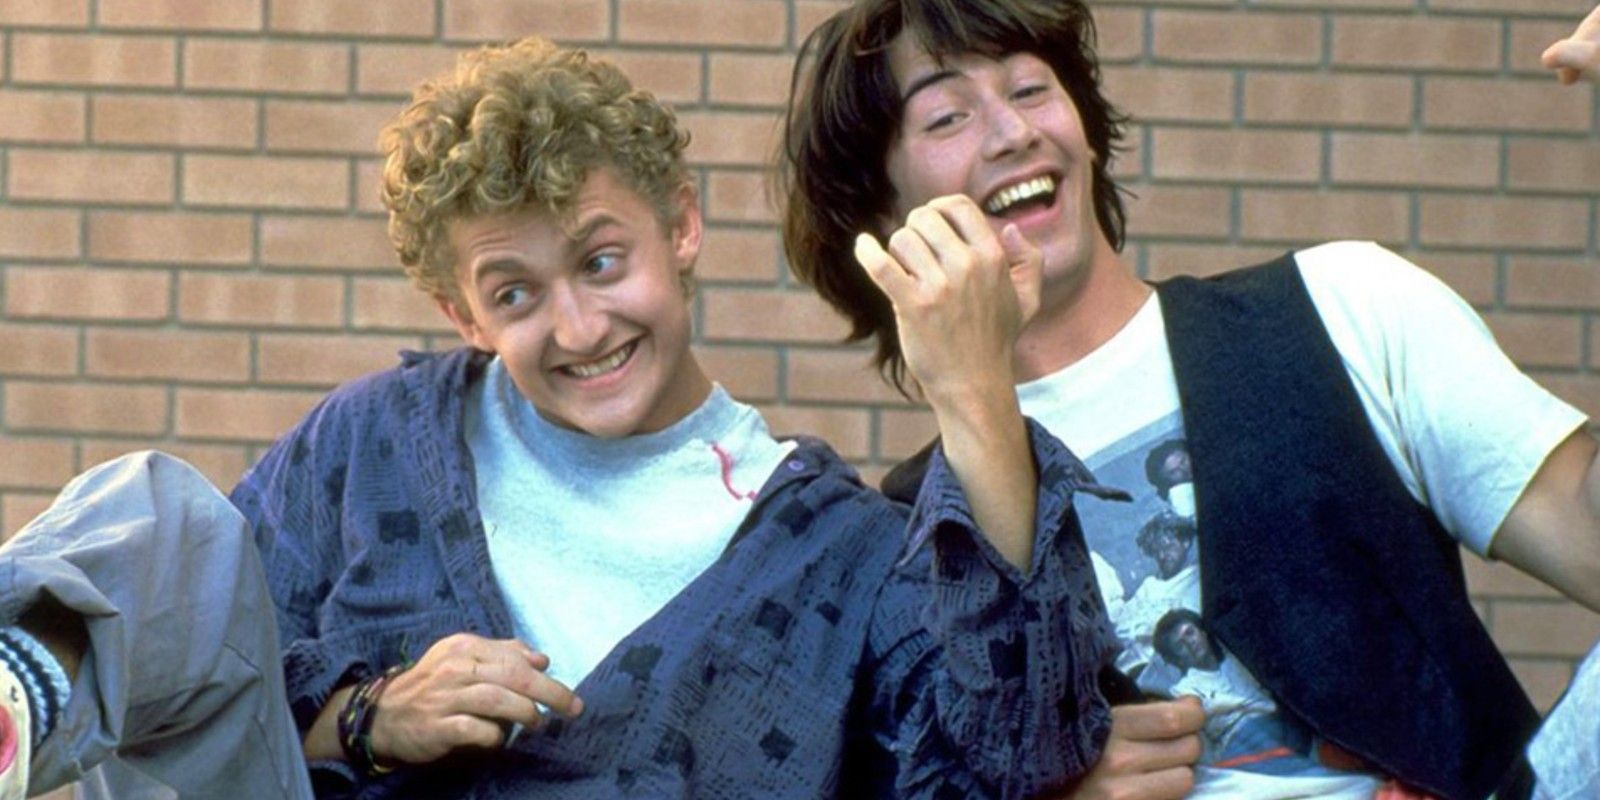 Bill and Ted Face The Music Air Guitar World Record